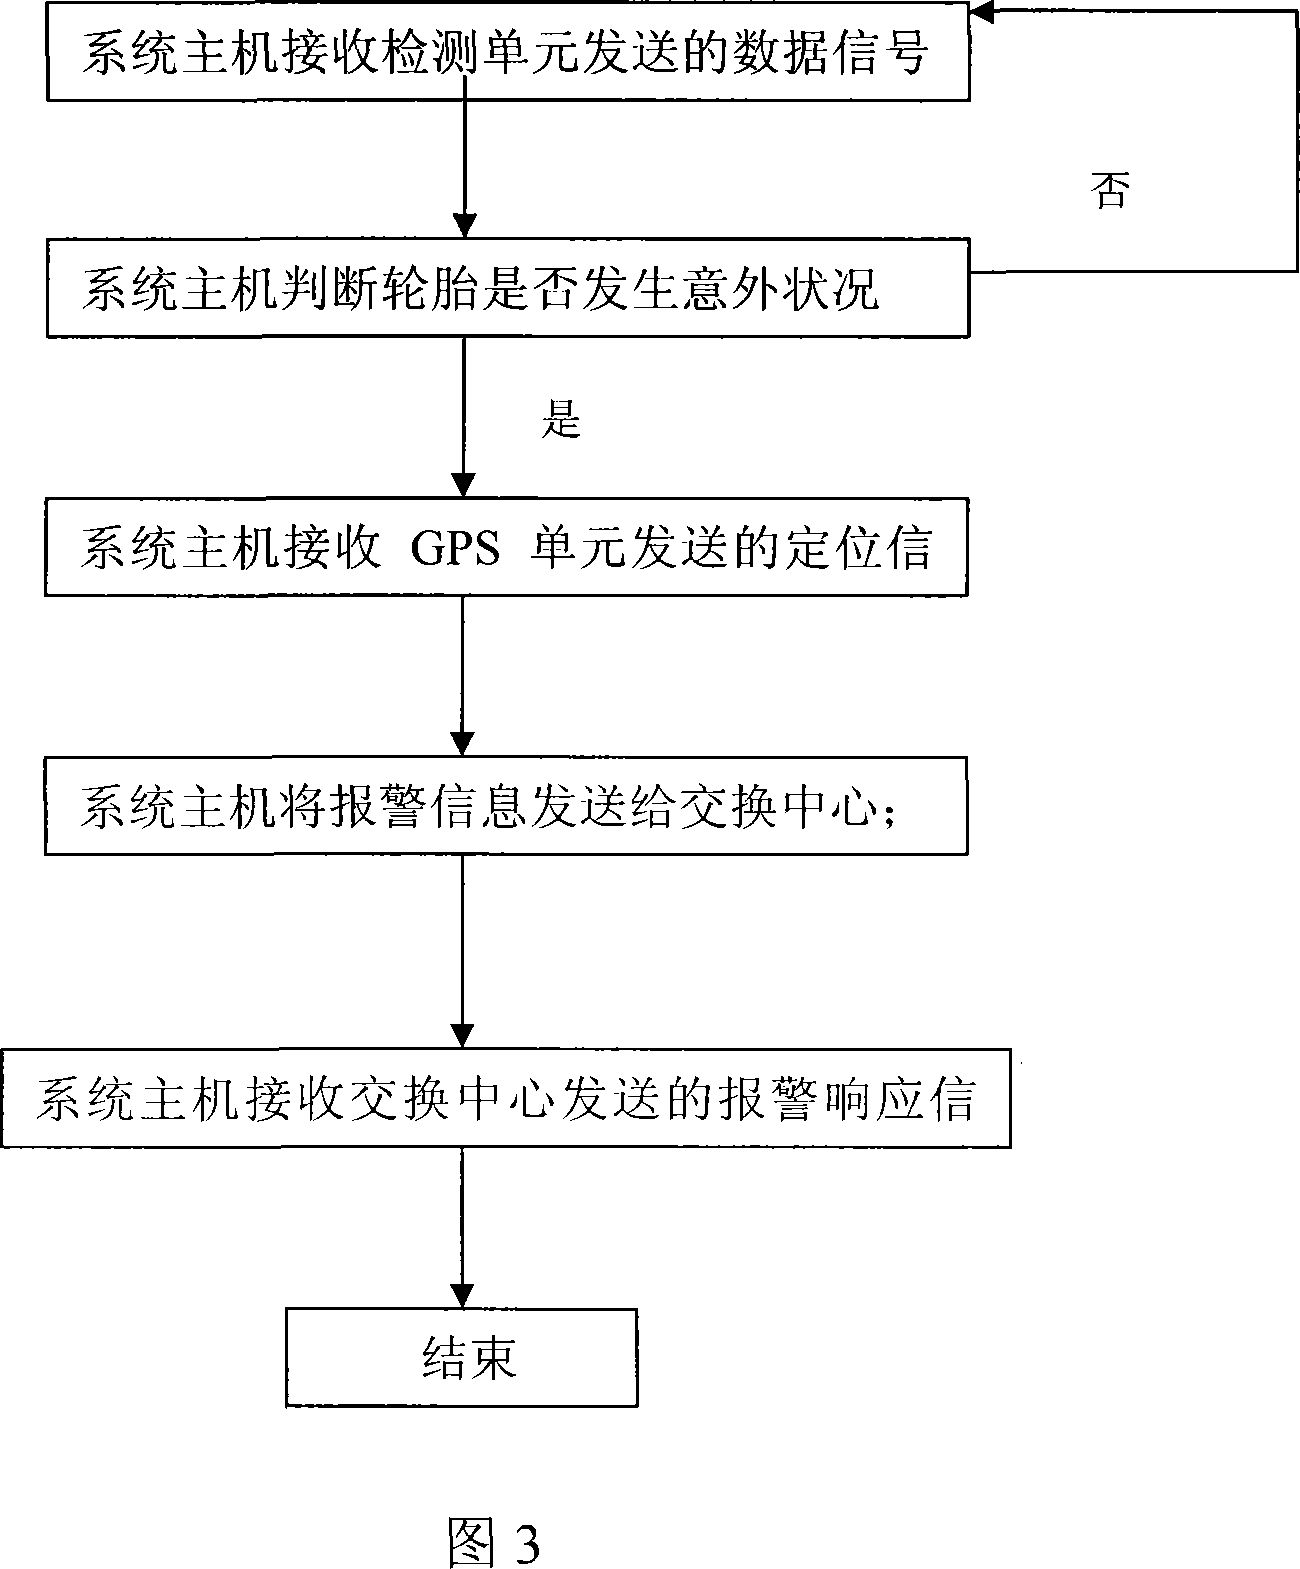 GPS and 3G network based vehicle tyre pressure monitoring system and monitoring process method